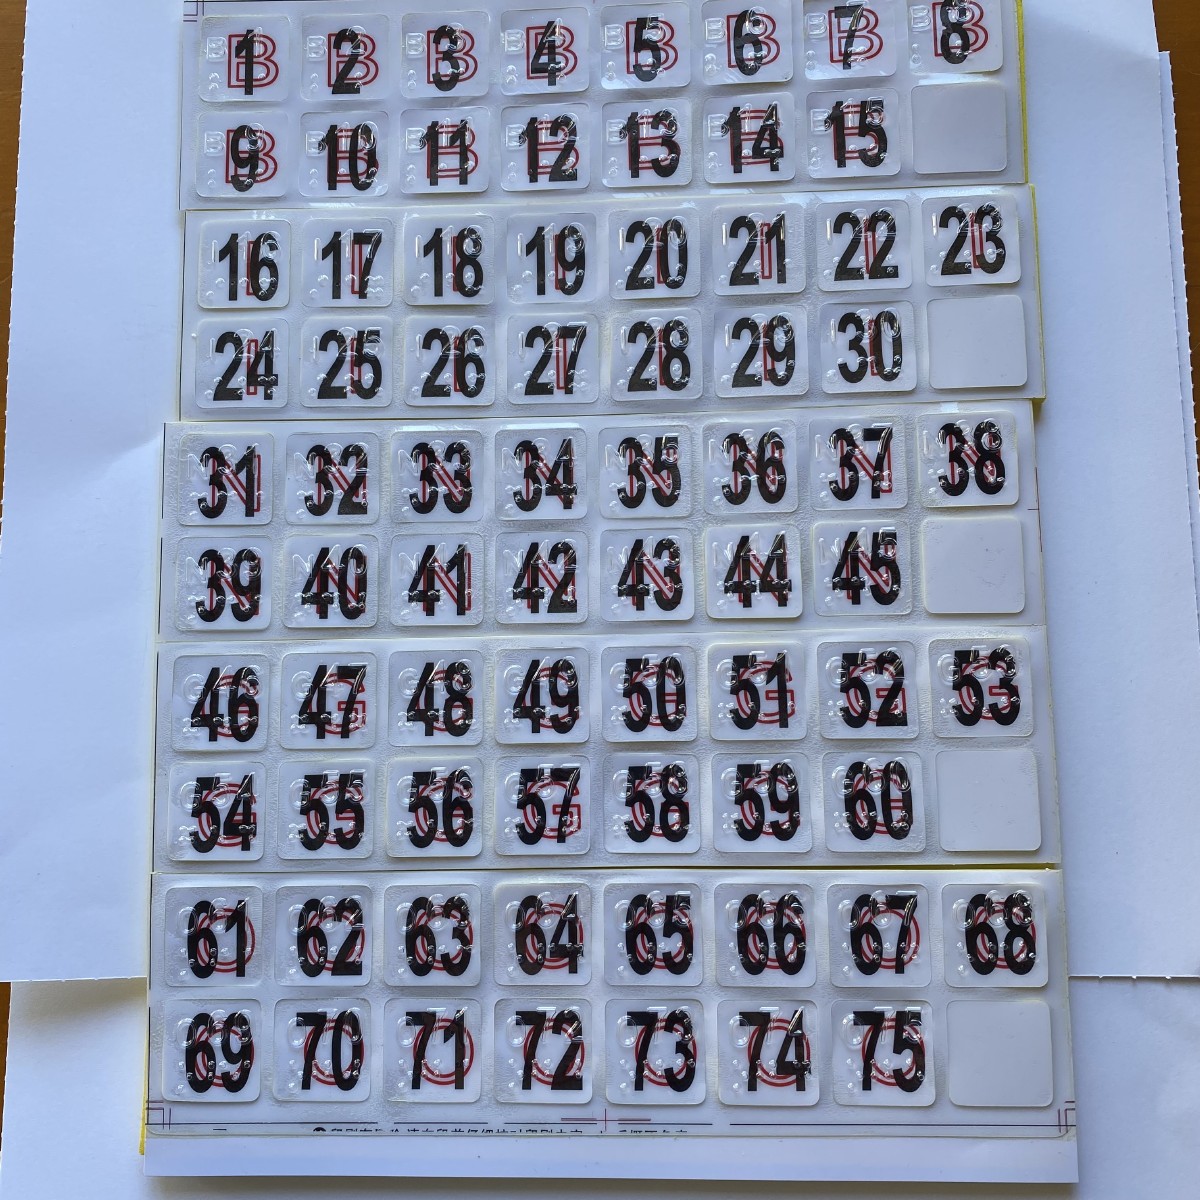 Larger picture of our Bingo Call Numbers